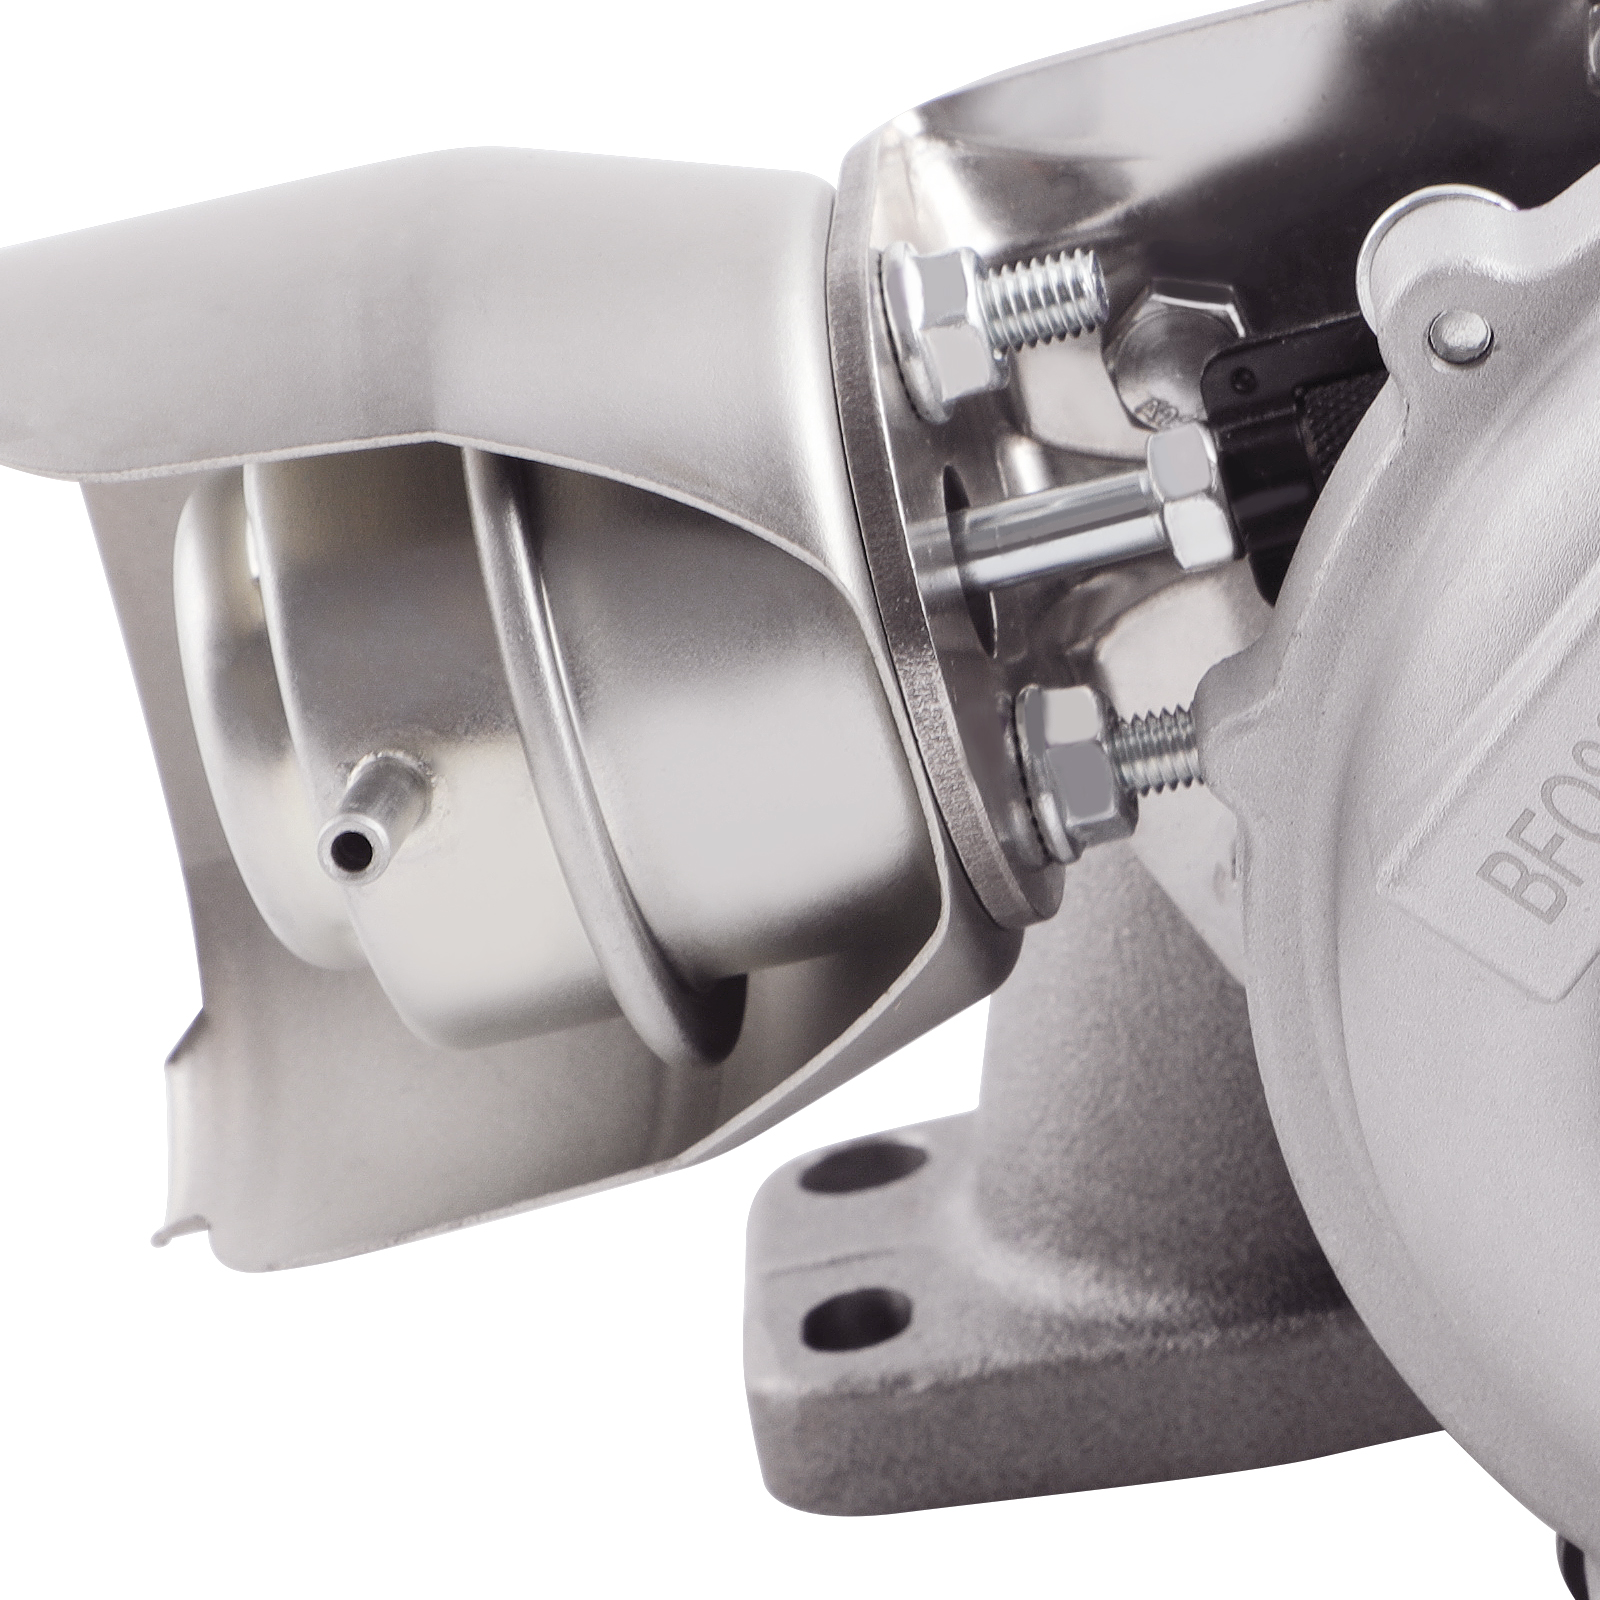 new 1.6 HDI TDCI 109 PS 80KW Turbocharger For Ford Citroen Peugeot Volvo Mazda